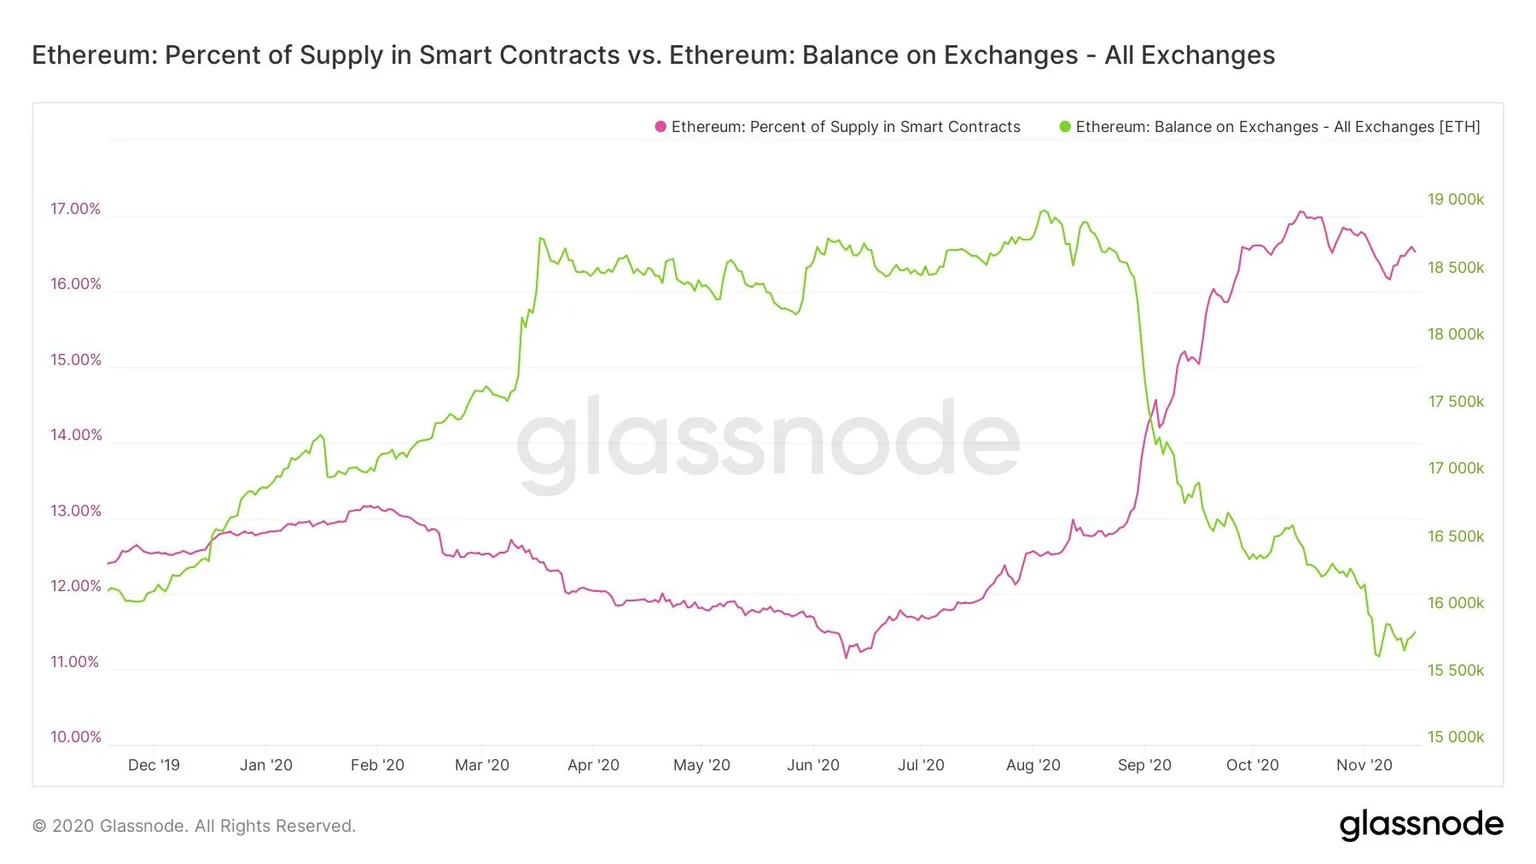 ETH in exchanges vs ETH in smart contracts. Image: Glassnode, compiled by Anthony Sassano